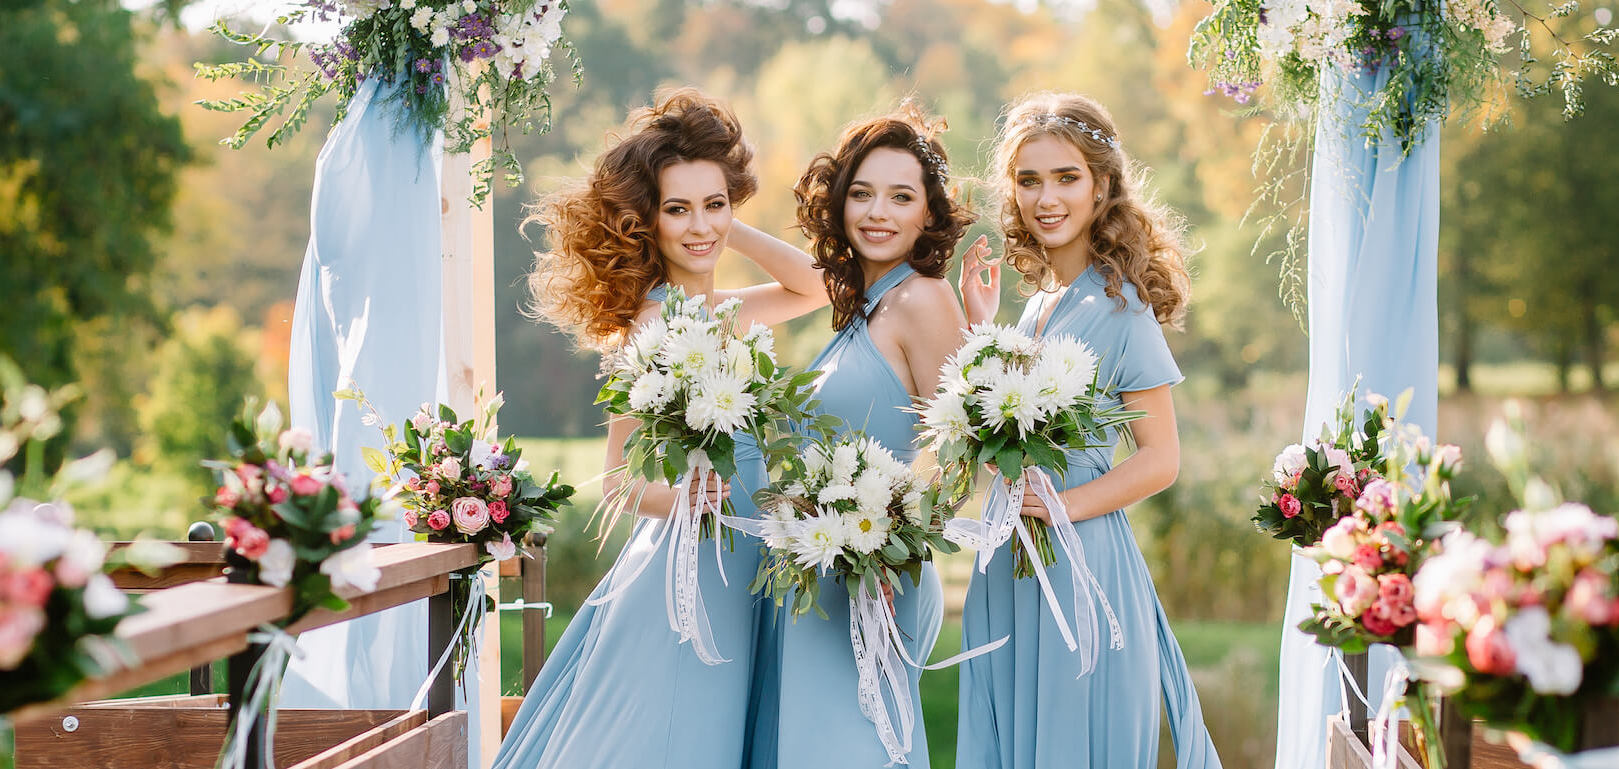 Choose the Perfect Dresses for your Bridesmaids